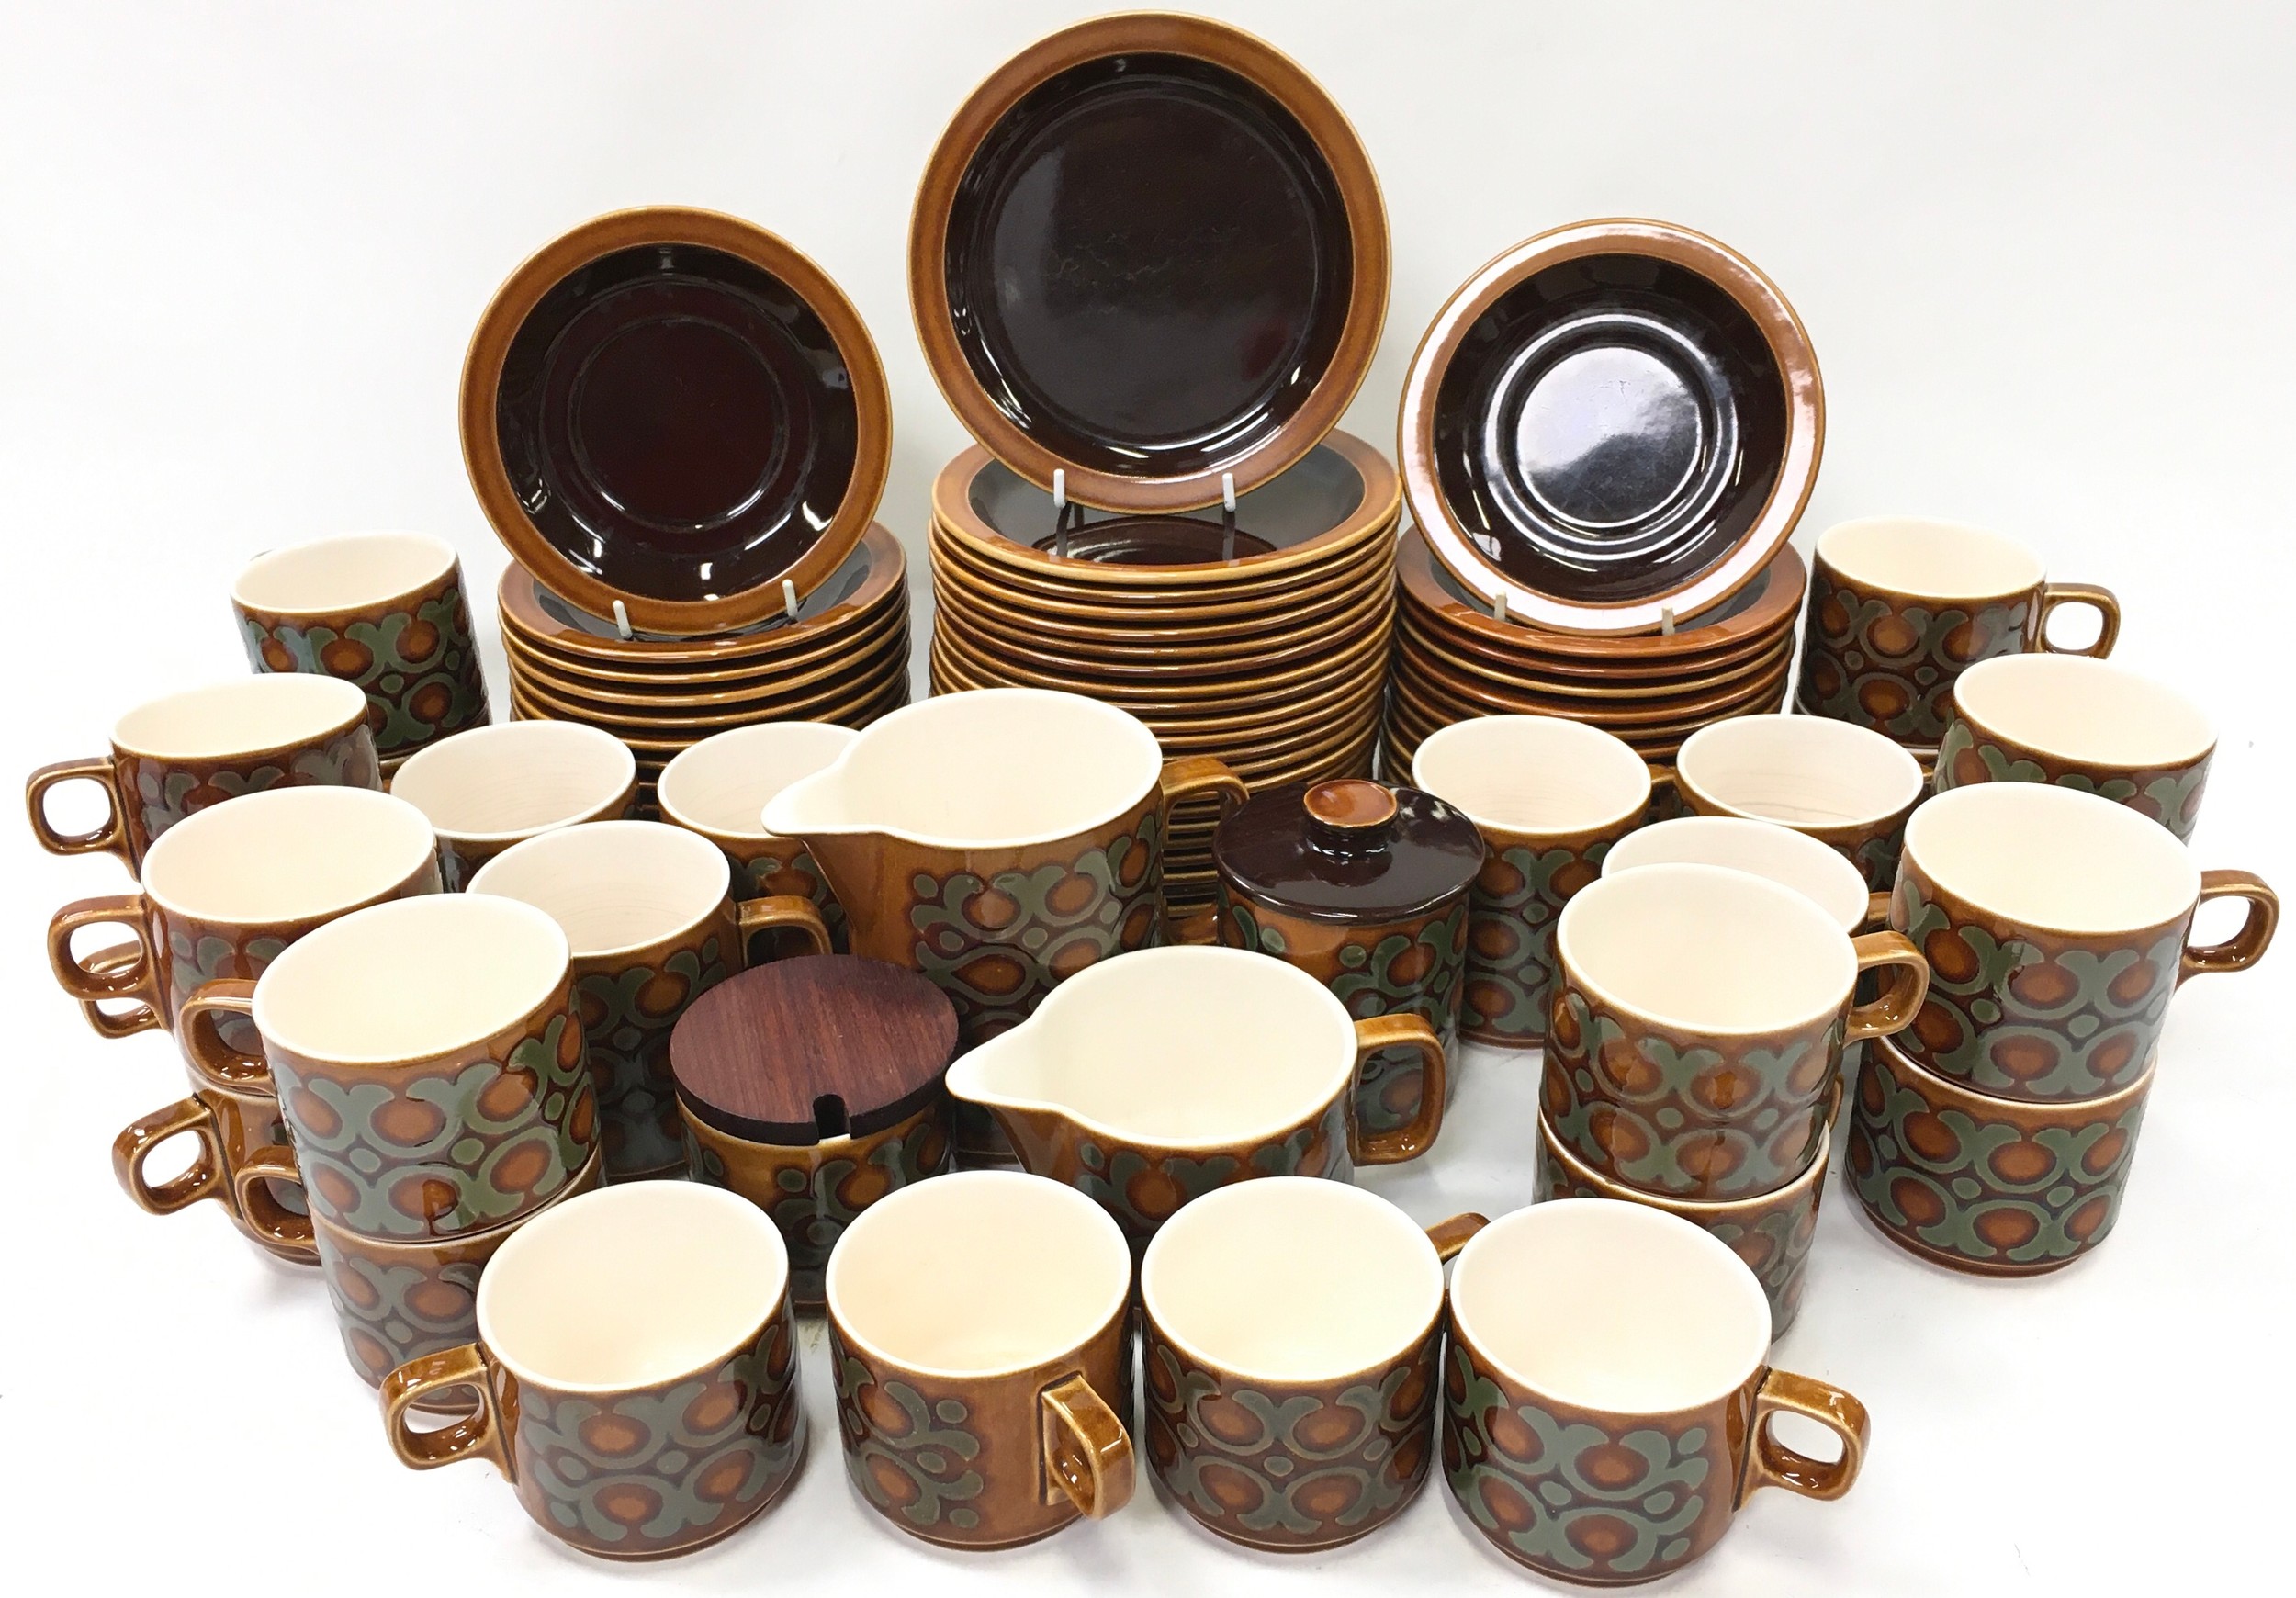 Extensive collection of Hornsey pottery teaware in the Bronte pattern to include cups, mugs, tea and